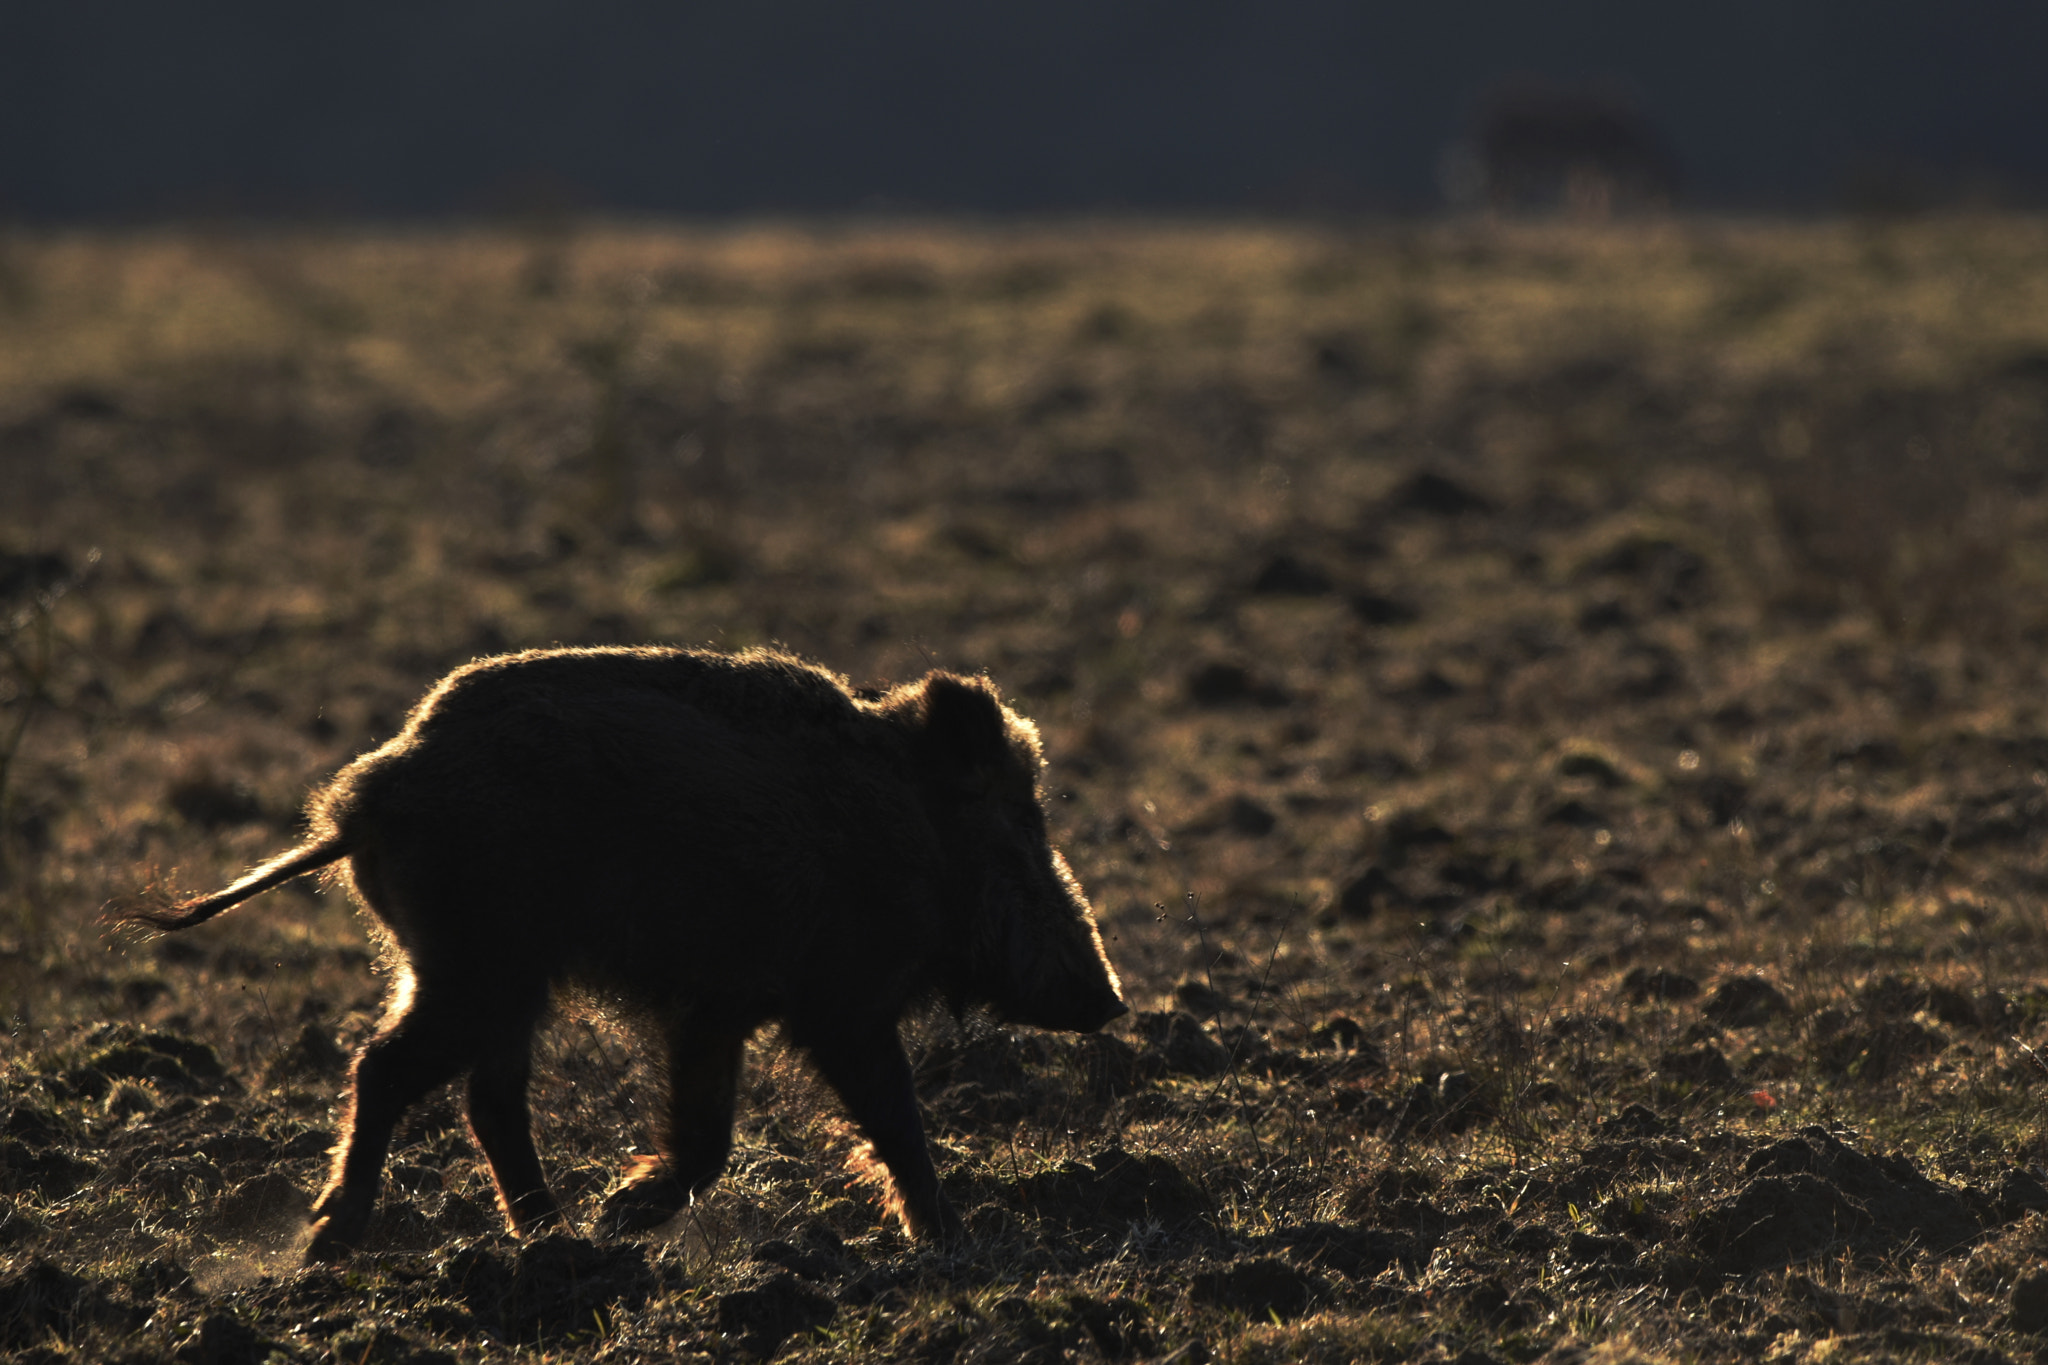 Nikon D5500 + Sigma 150-600mm F5-6.3 DG OS HSM | C sample photo. Wild boar with backlighting photography